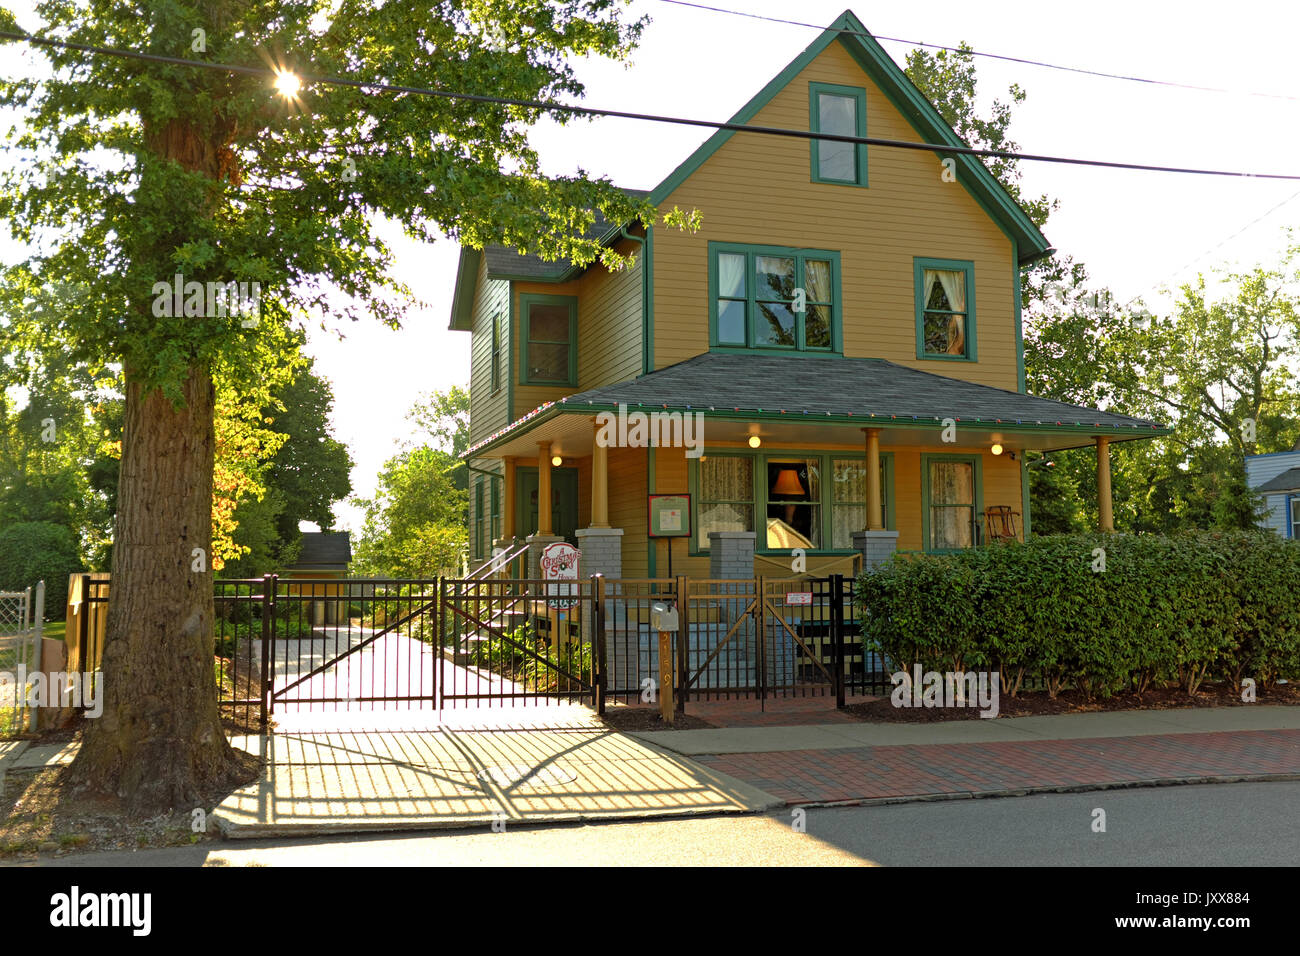 The house from the classic movie 'A Christmas Story', located in the Tremont neighborhood of Cleveland, Ohio, USA, has become a mecca for fans. Stock Photo